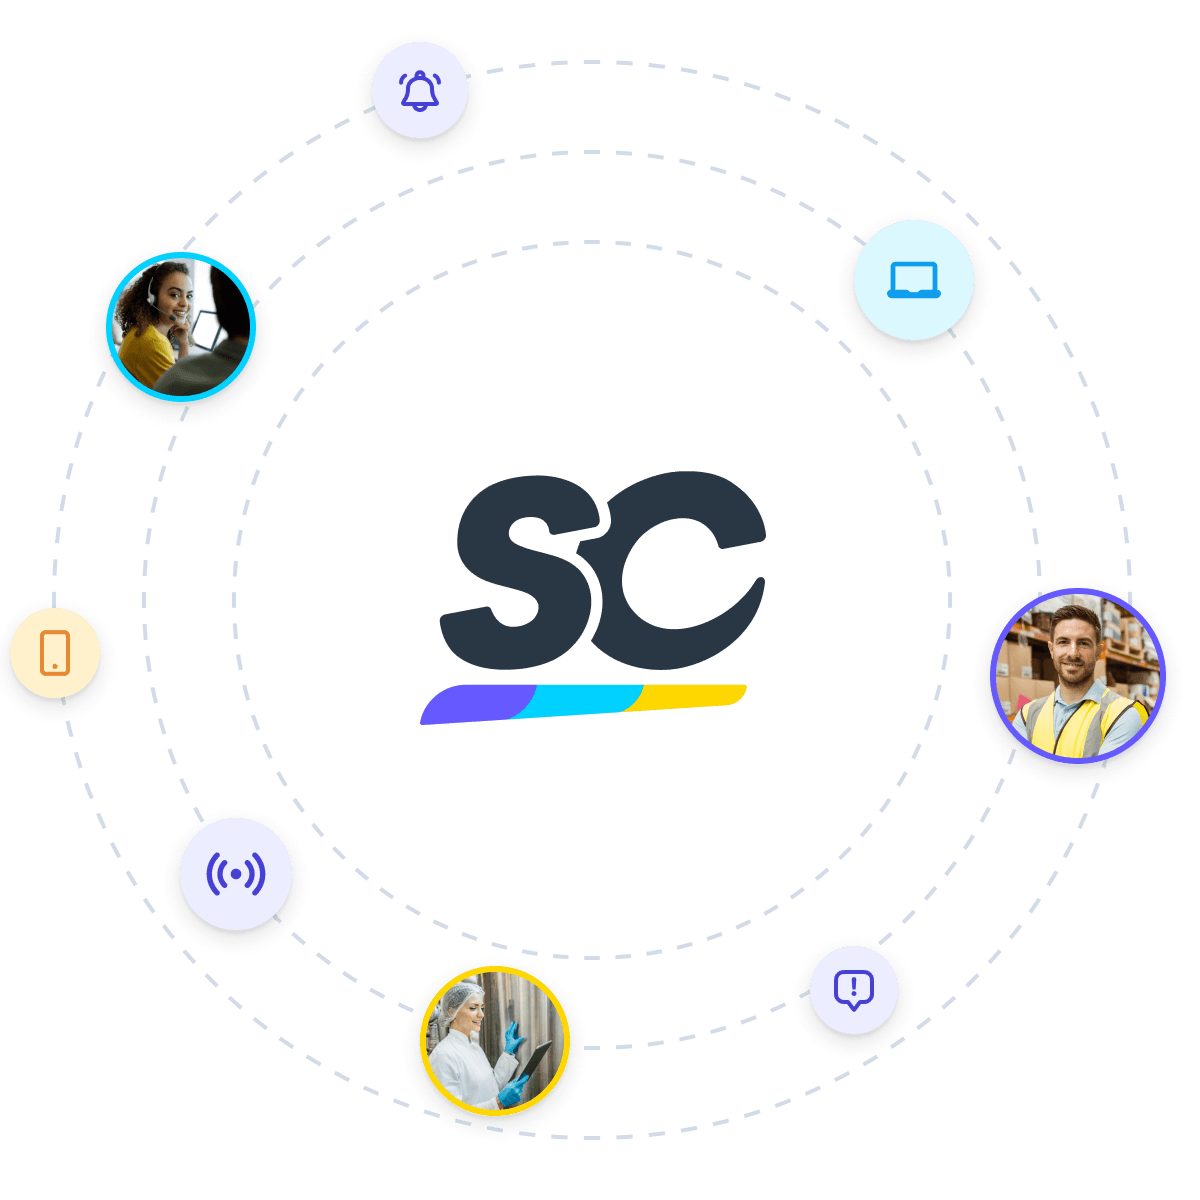 safetyculture as an operations management alternative solution